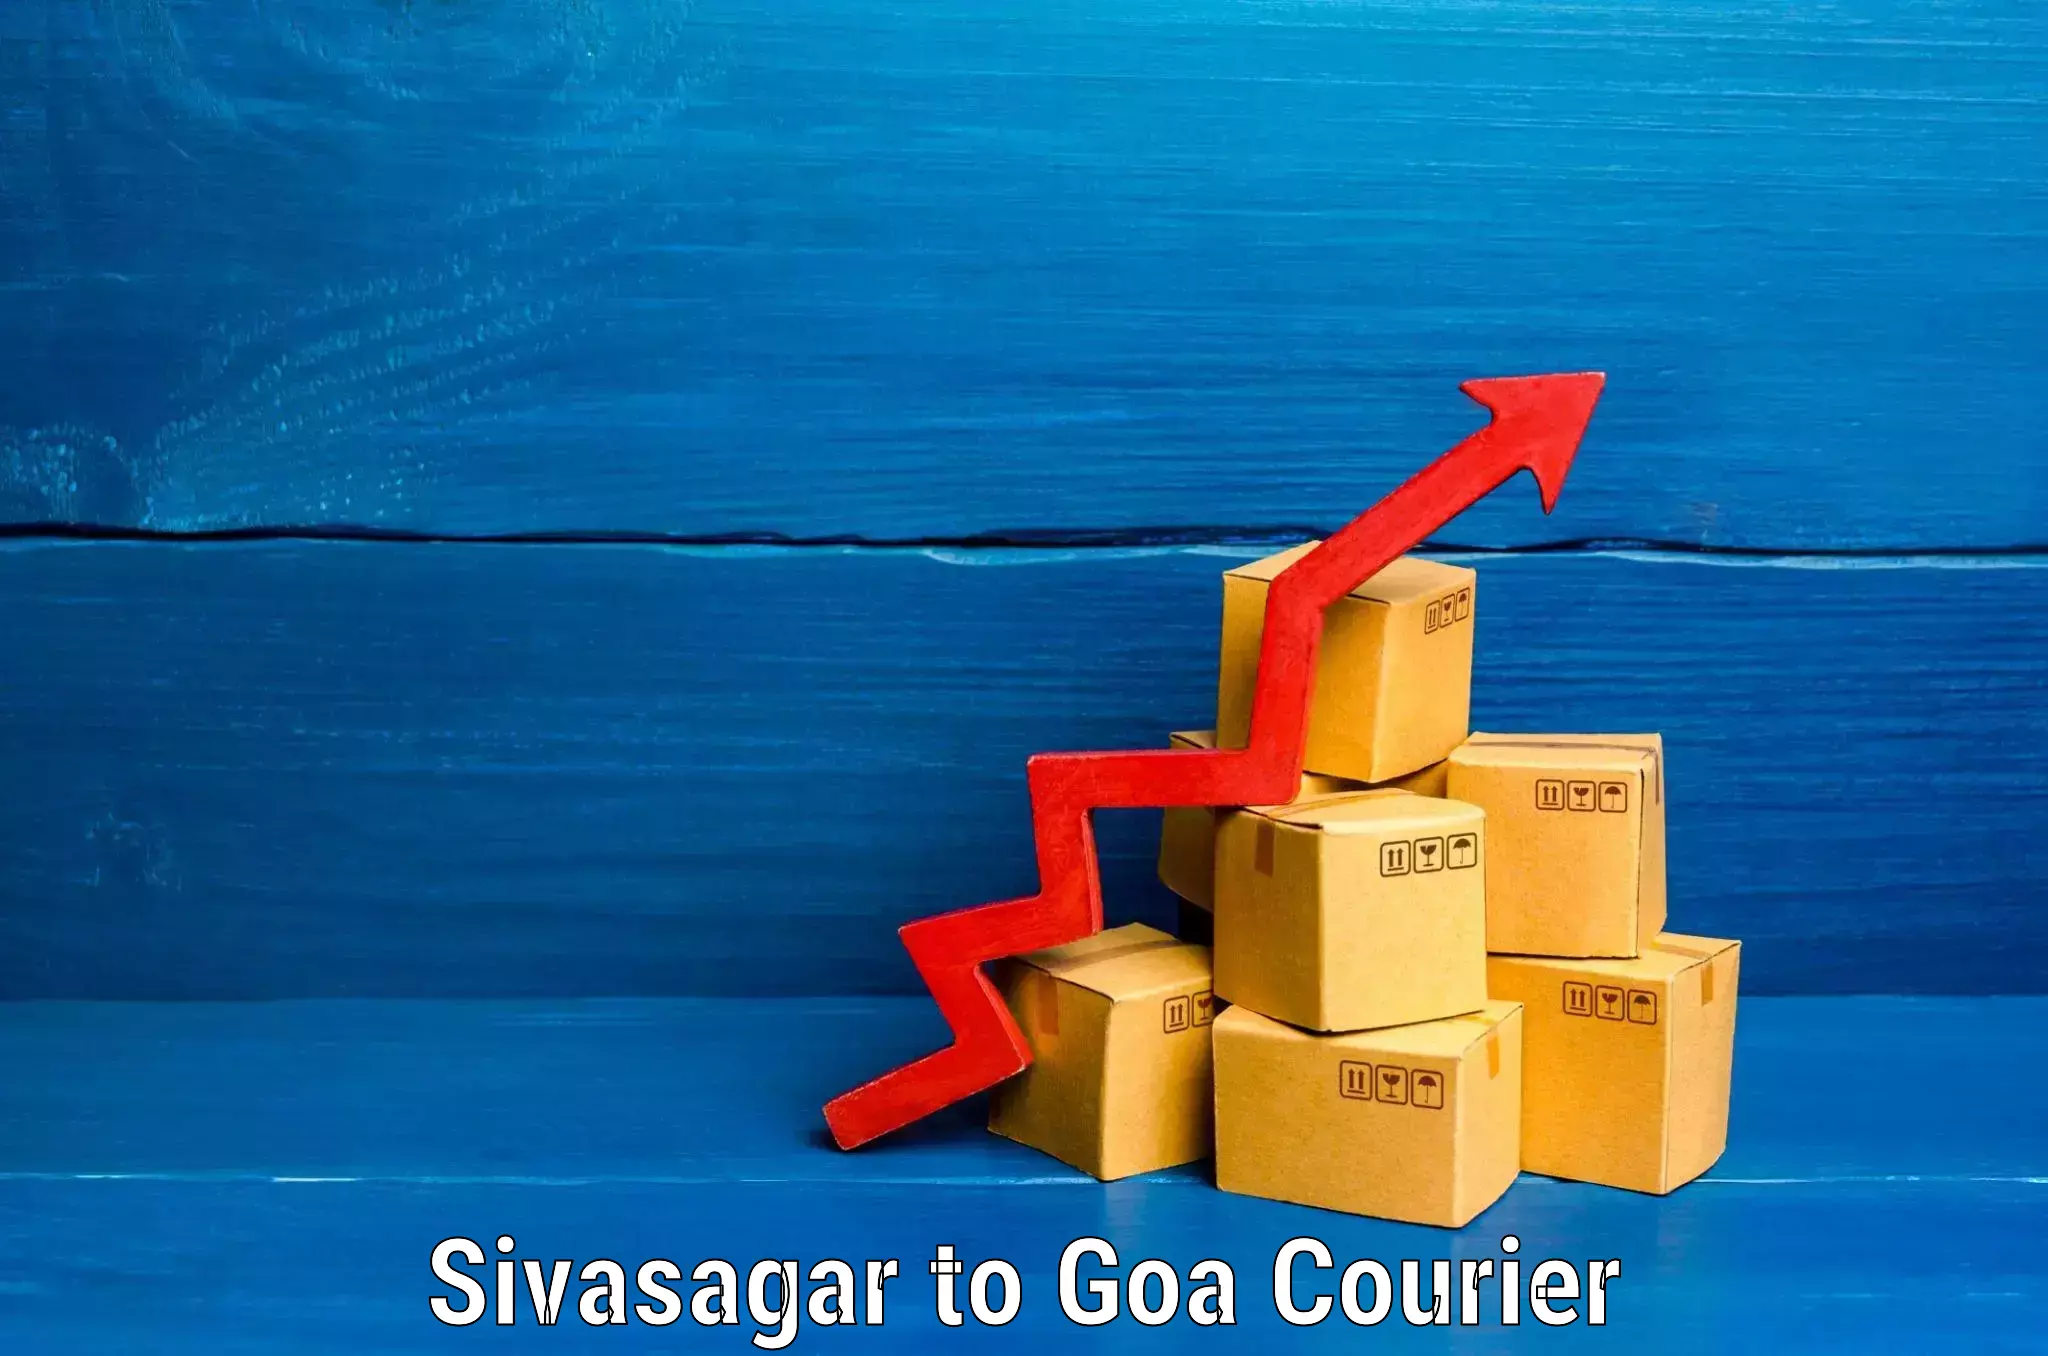 Luggage delivery network Sivasagar to Goa